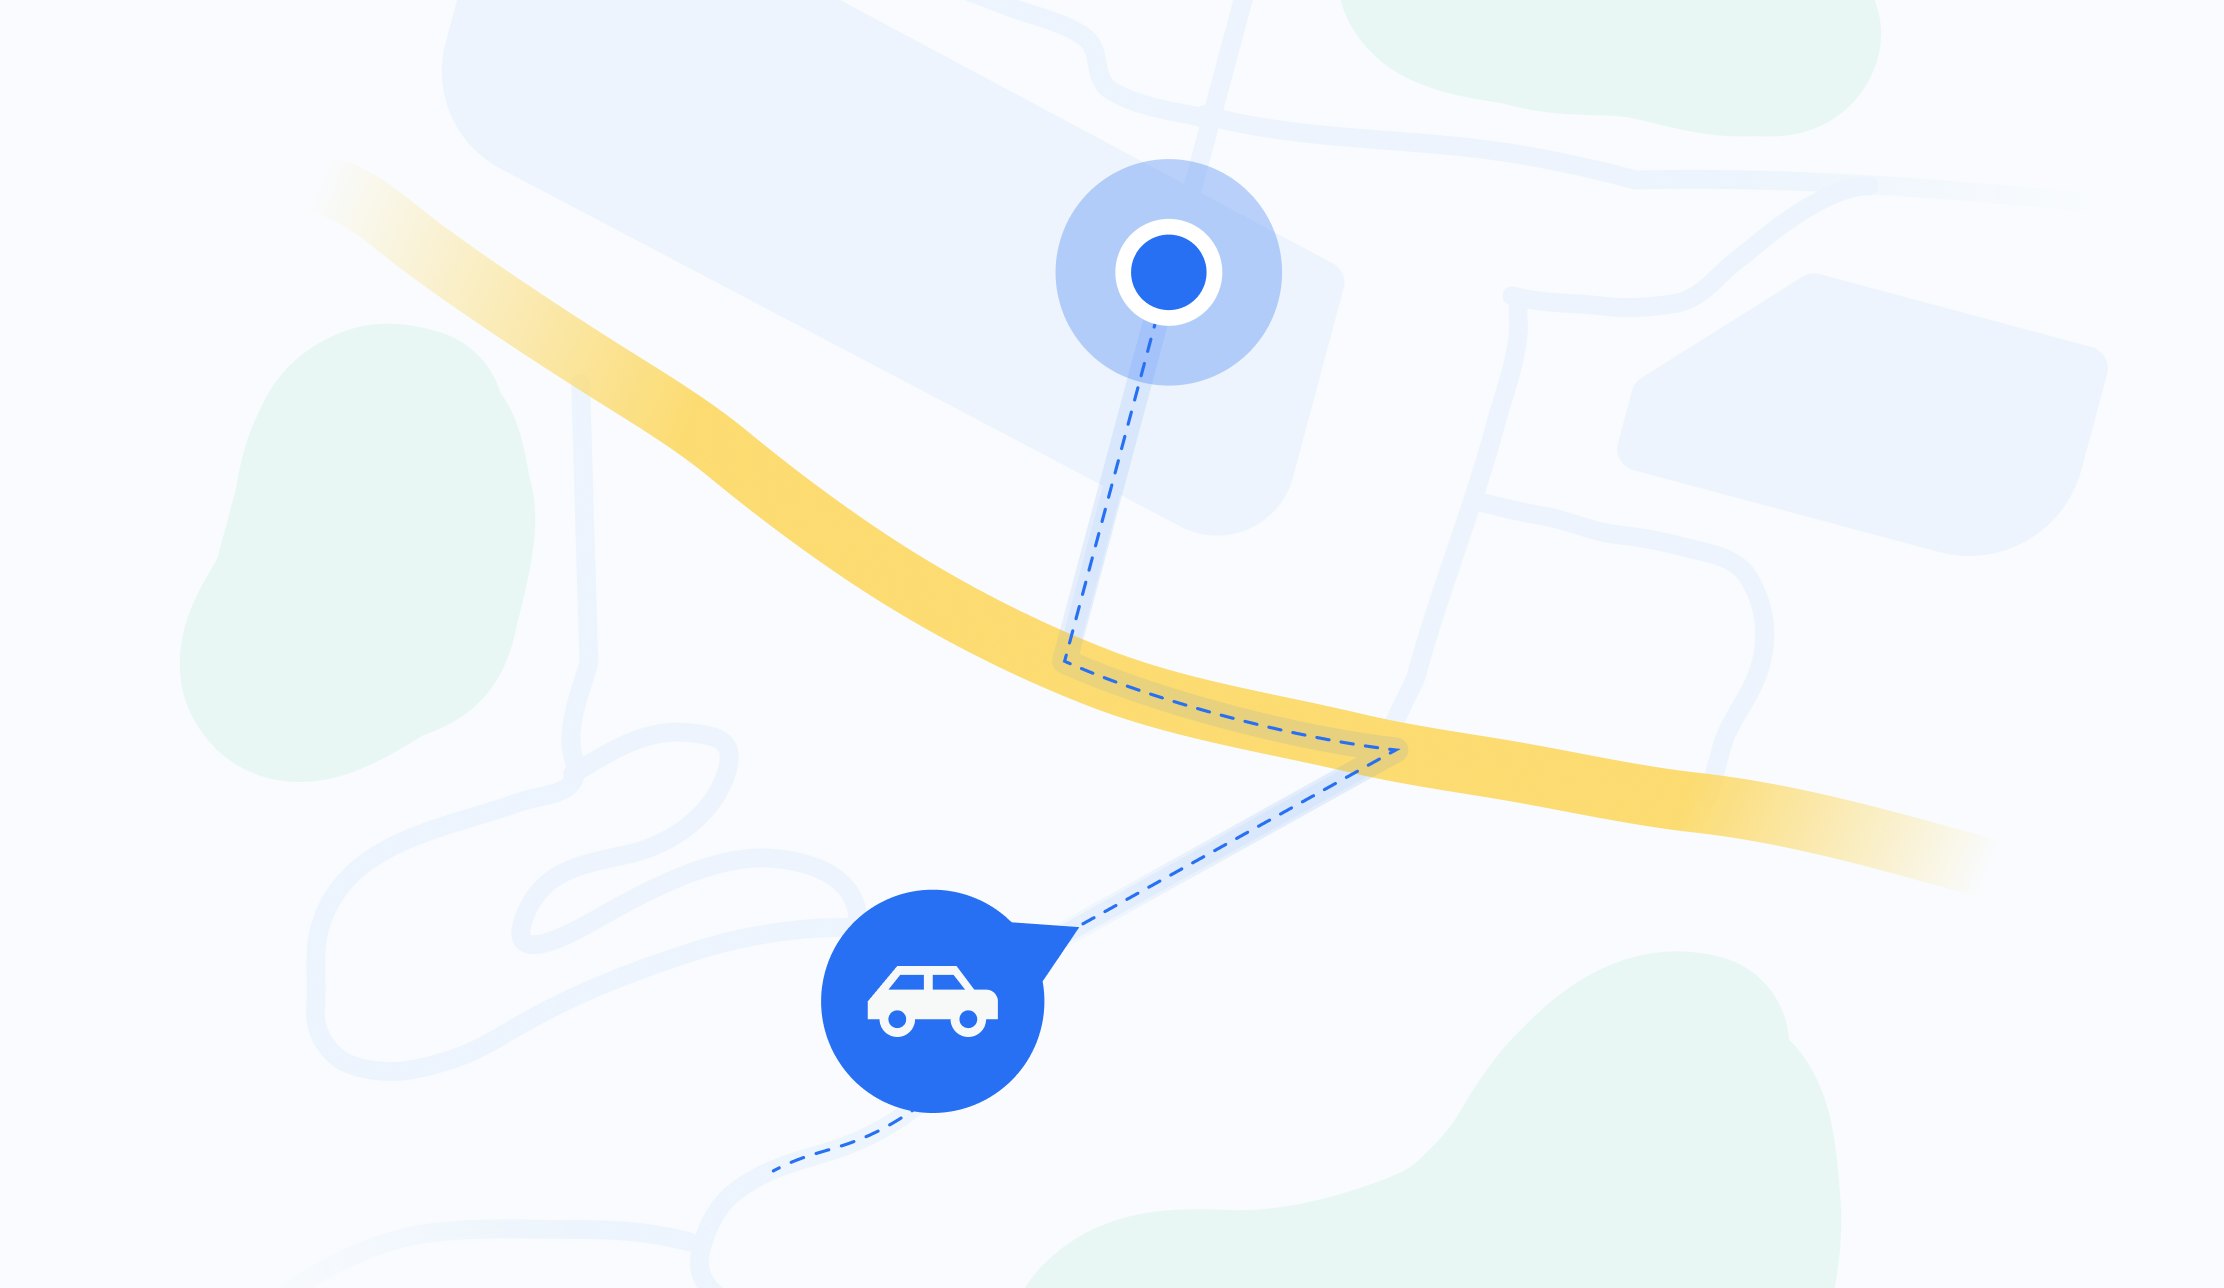 Local delivery: map of a small area showing a car en-route to the final destination.